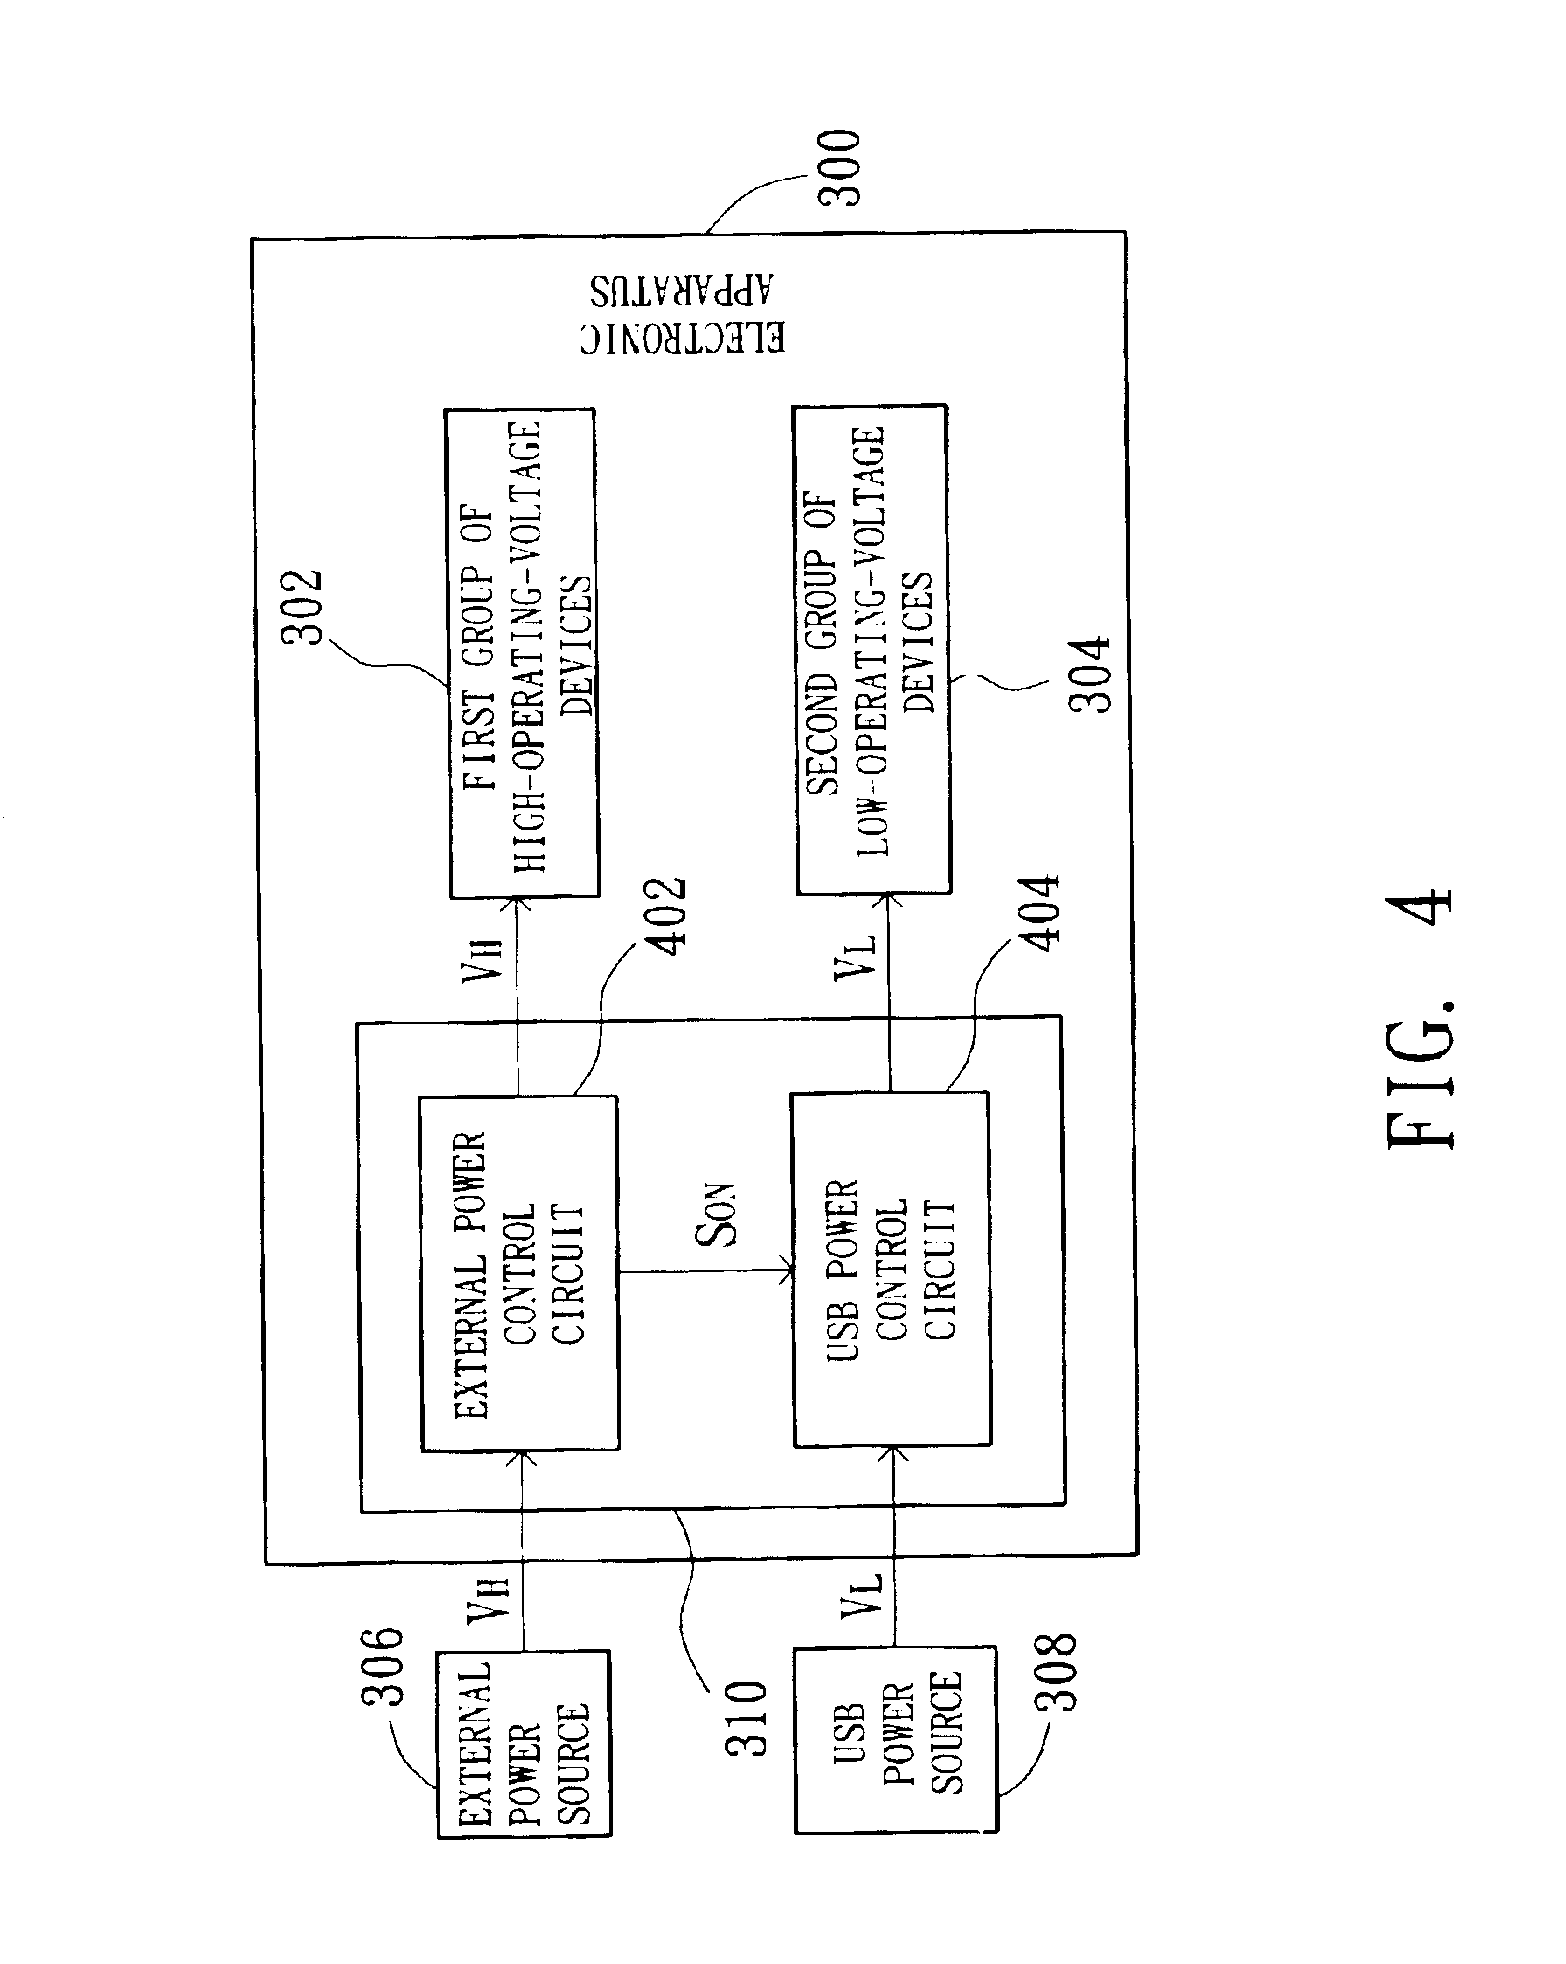 Electronic apparatus capable of using an external power source and a bus power source simultaneously